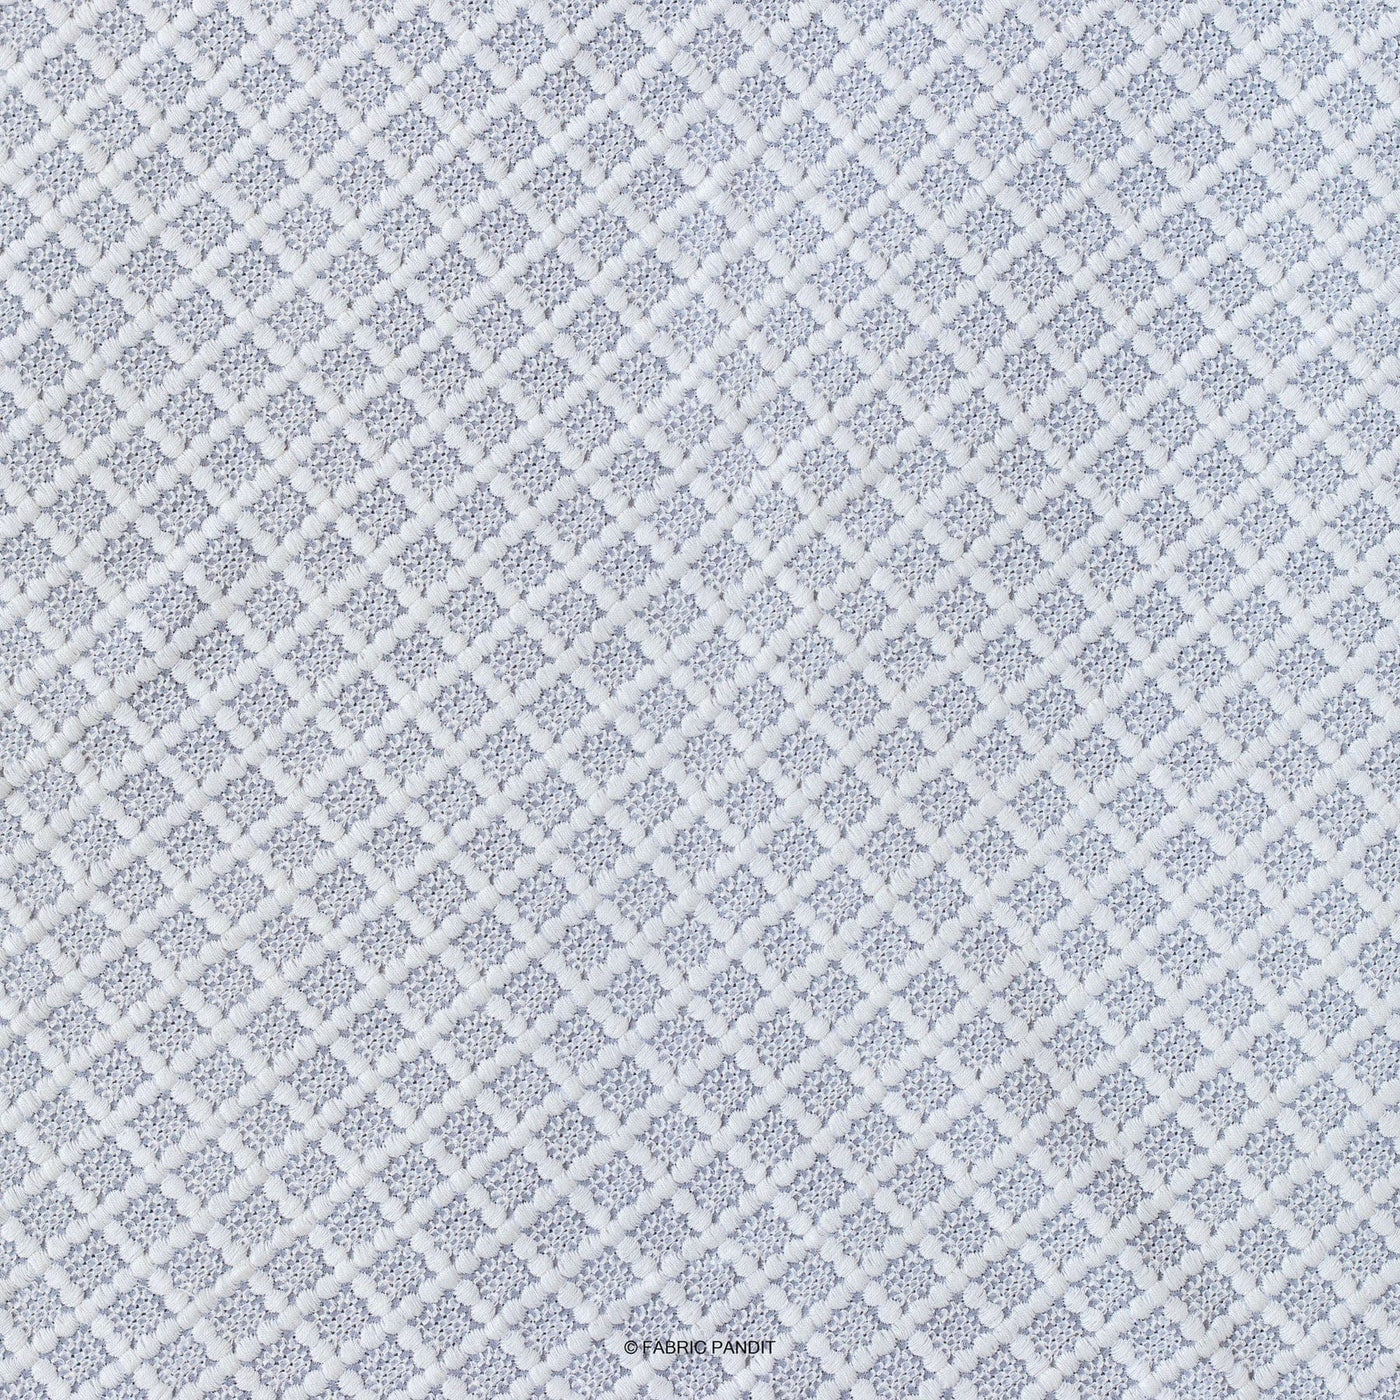 Fabric Pandit Fabric White Schifili Badla Embroidered All Over Diamond Pattern Pure Georgette Fabric (Width 41 inches)